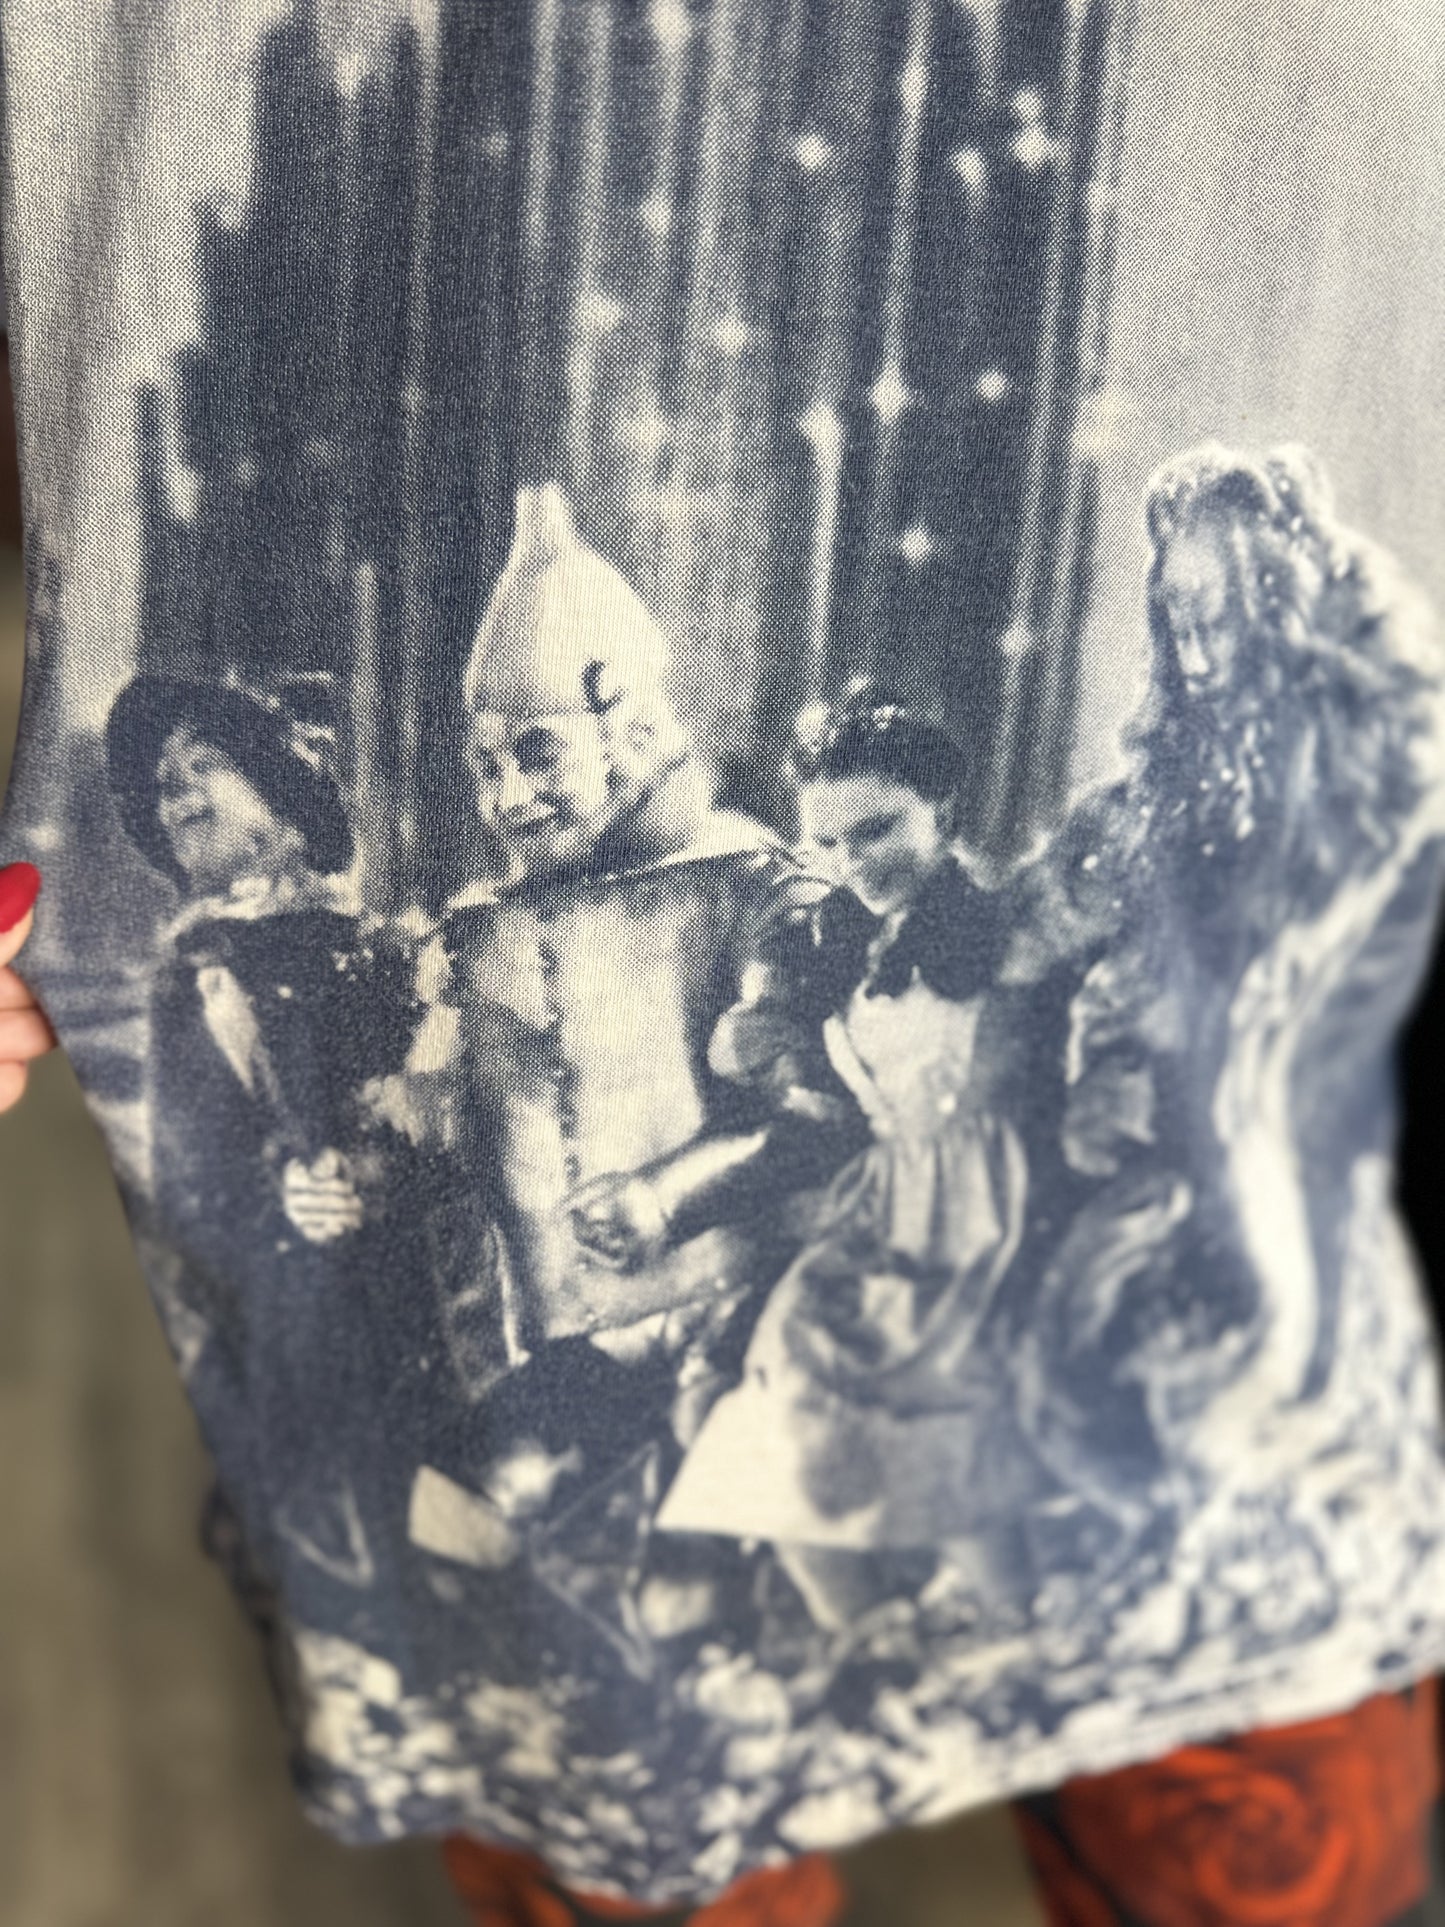 Vintage 90s Wizard of Oz T-shirt